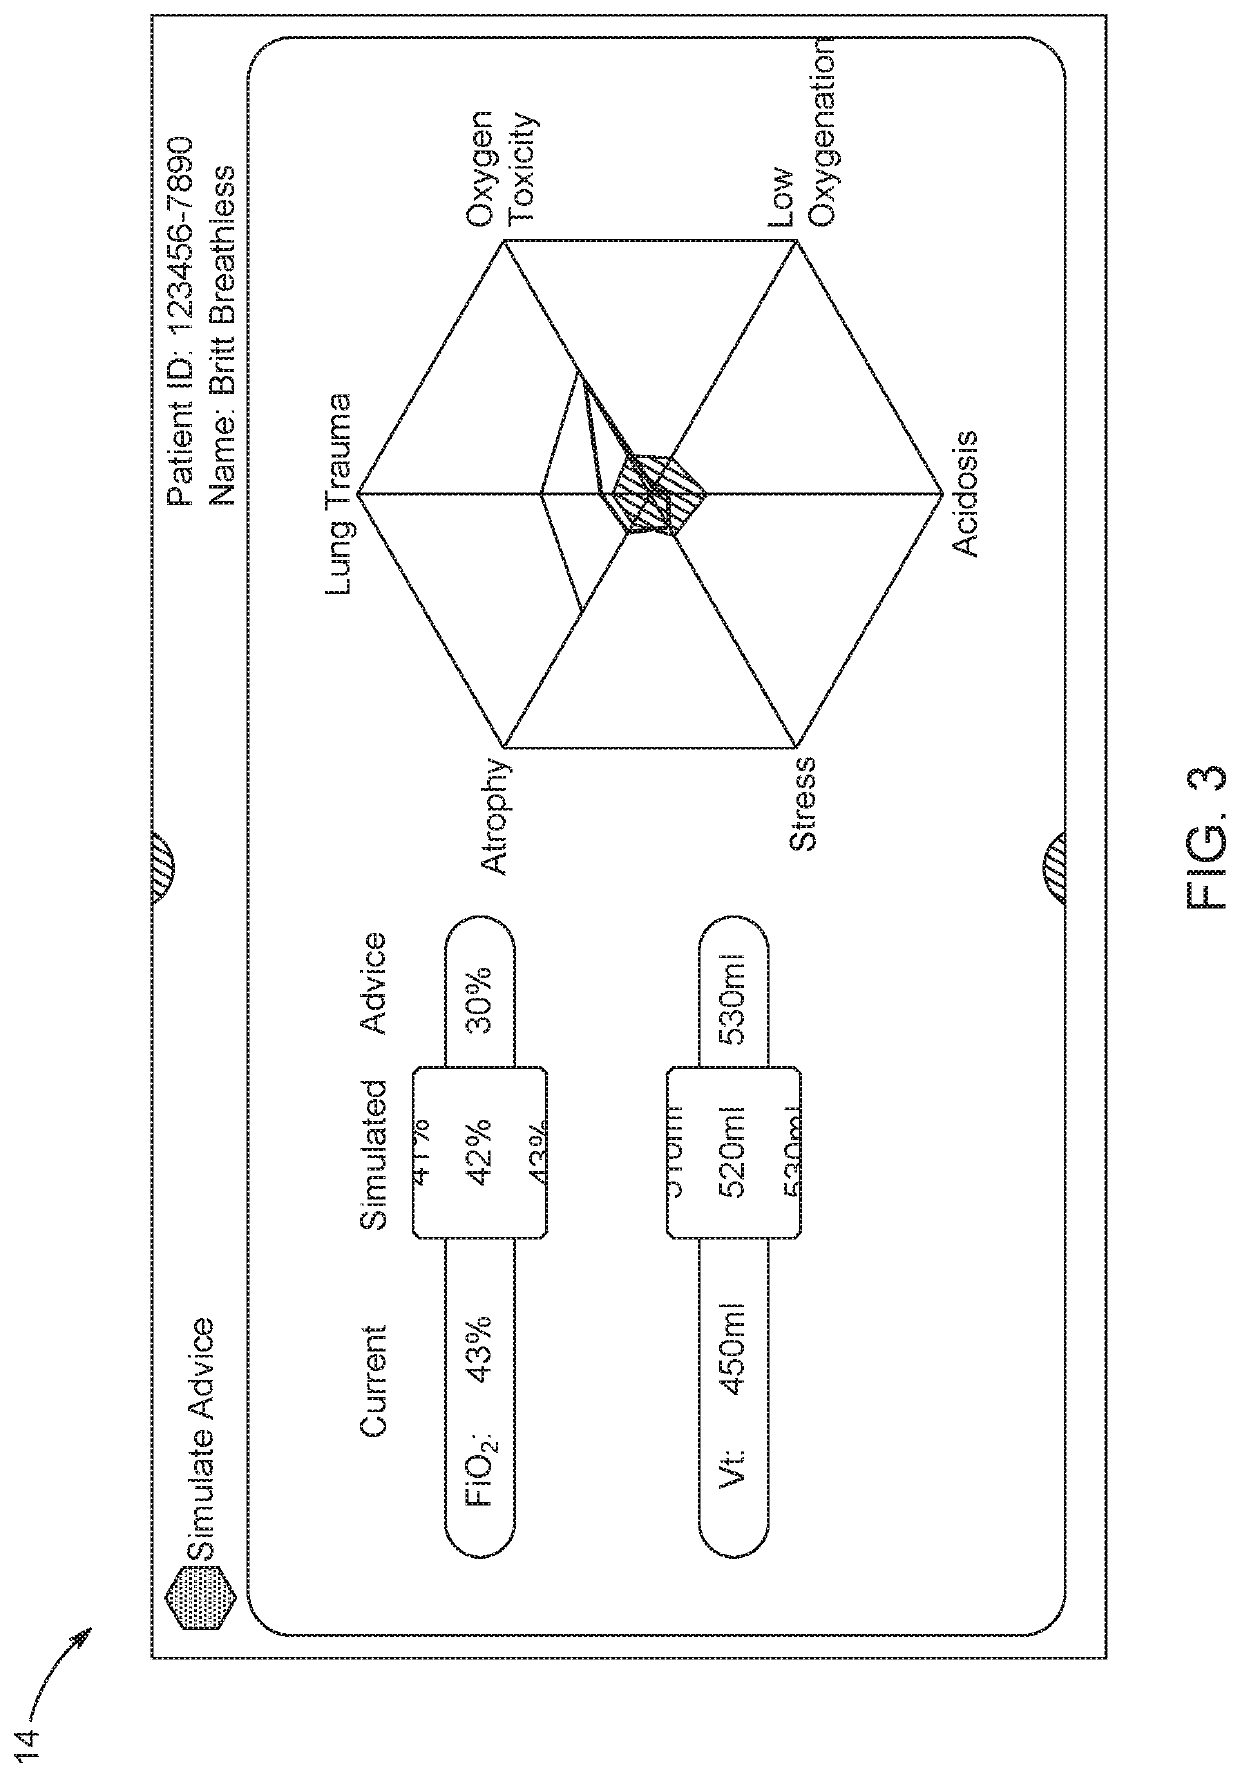 Decision support system for lung ventilator settings